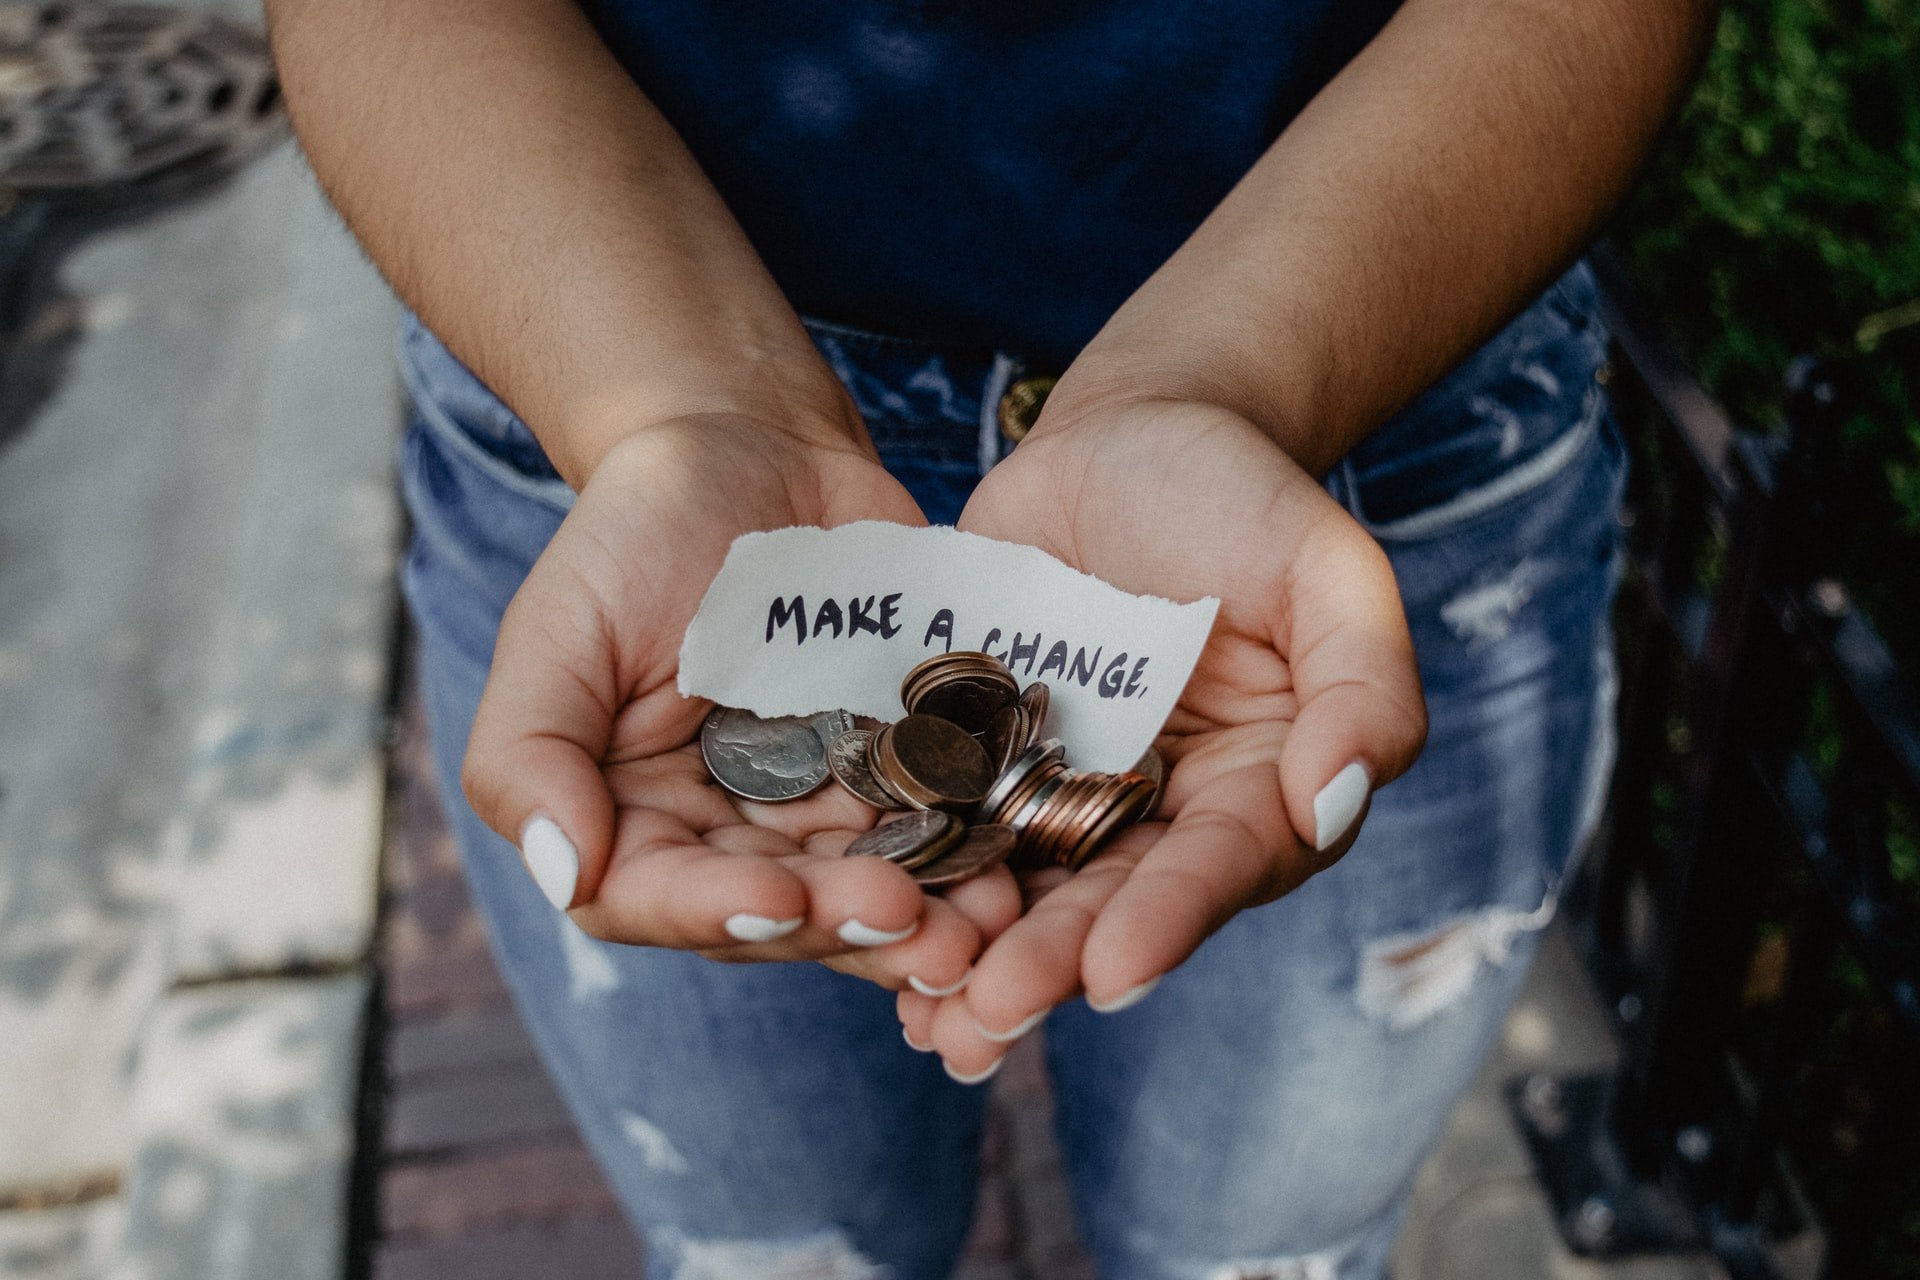 Other Redditors asked OP to donate to a homeless shelter instead | Source: Unsplash